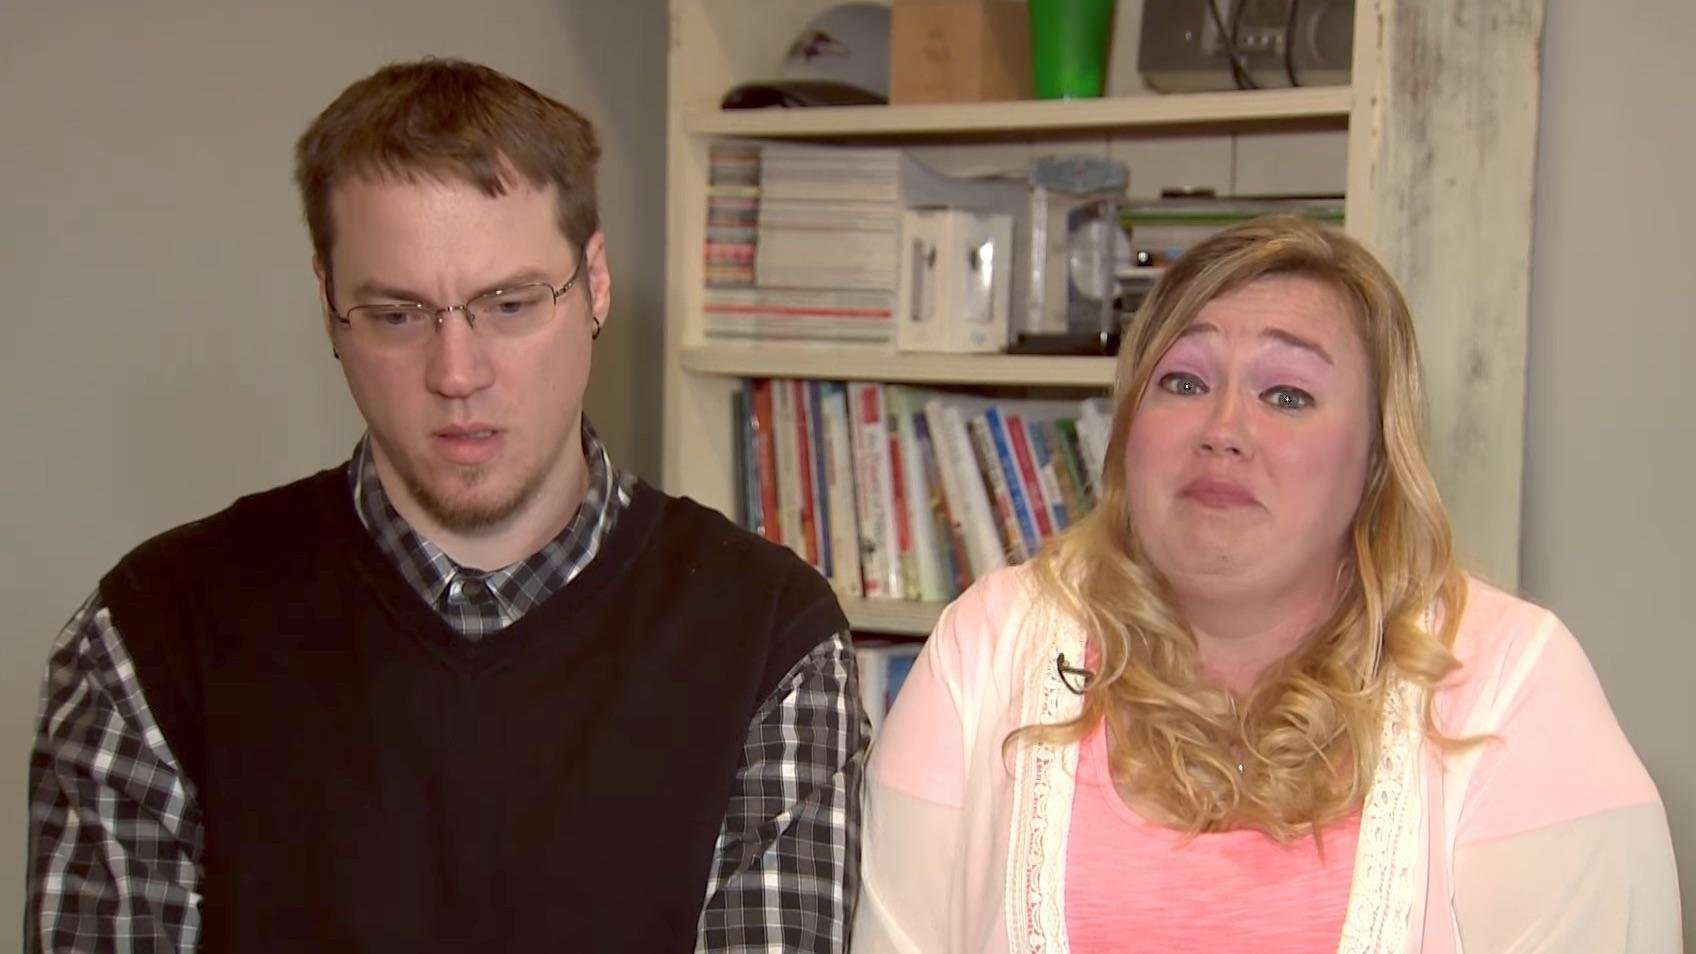 image for YouTube star Daddyofive loses custody of two children featured in 'prank' video, mother says